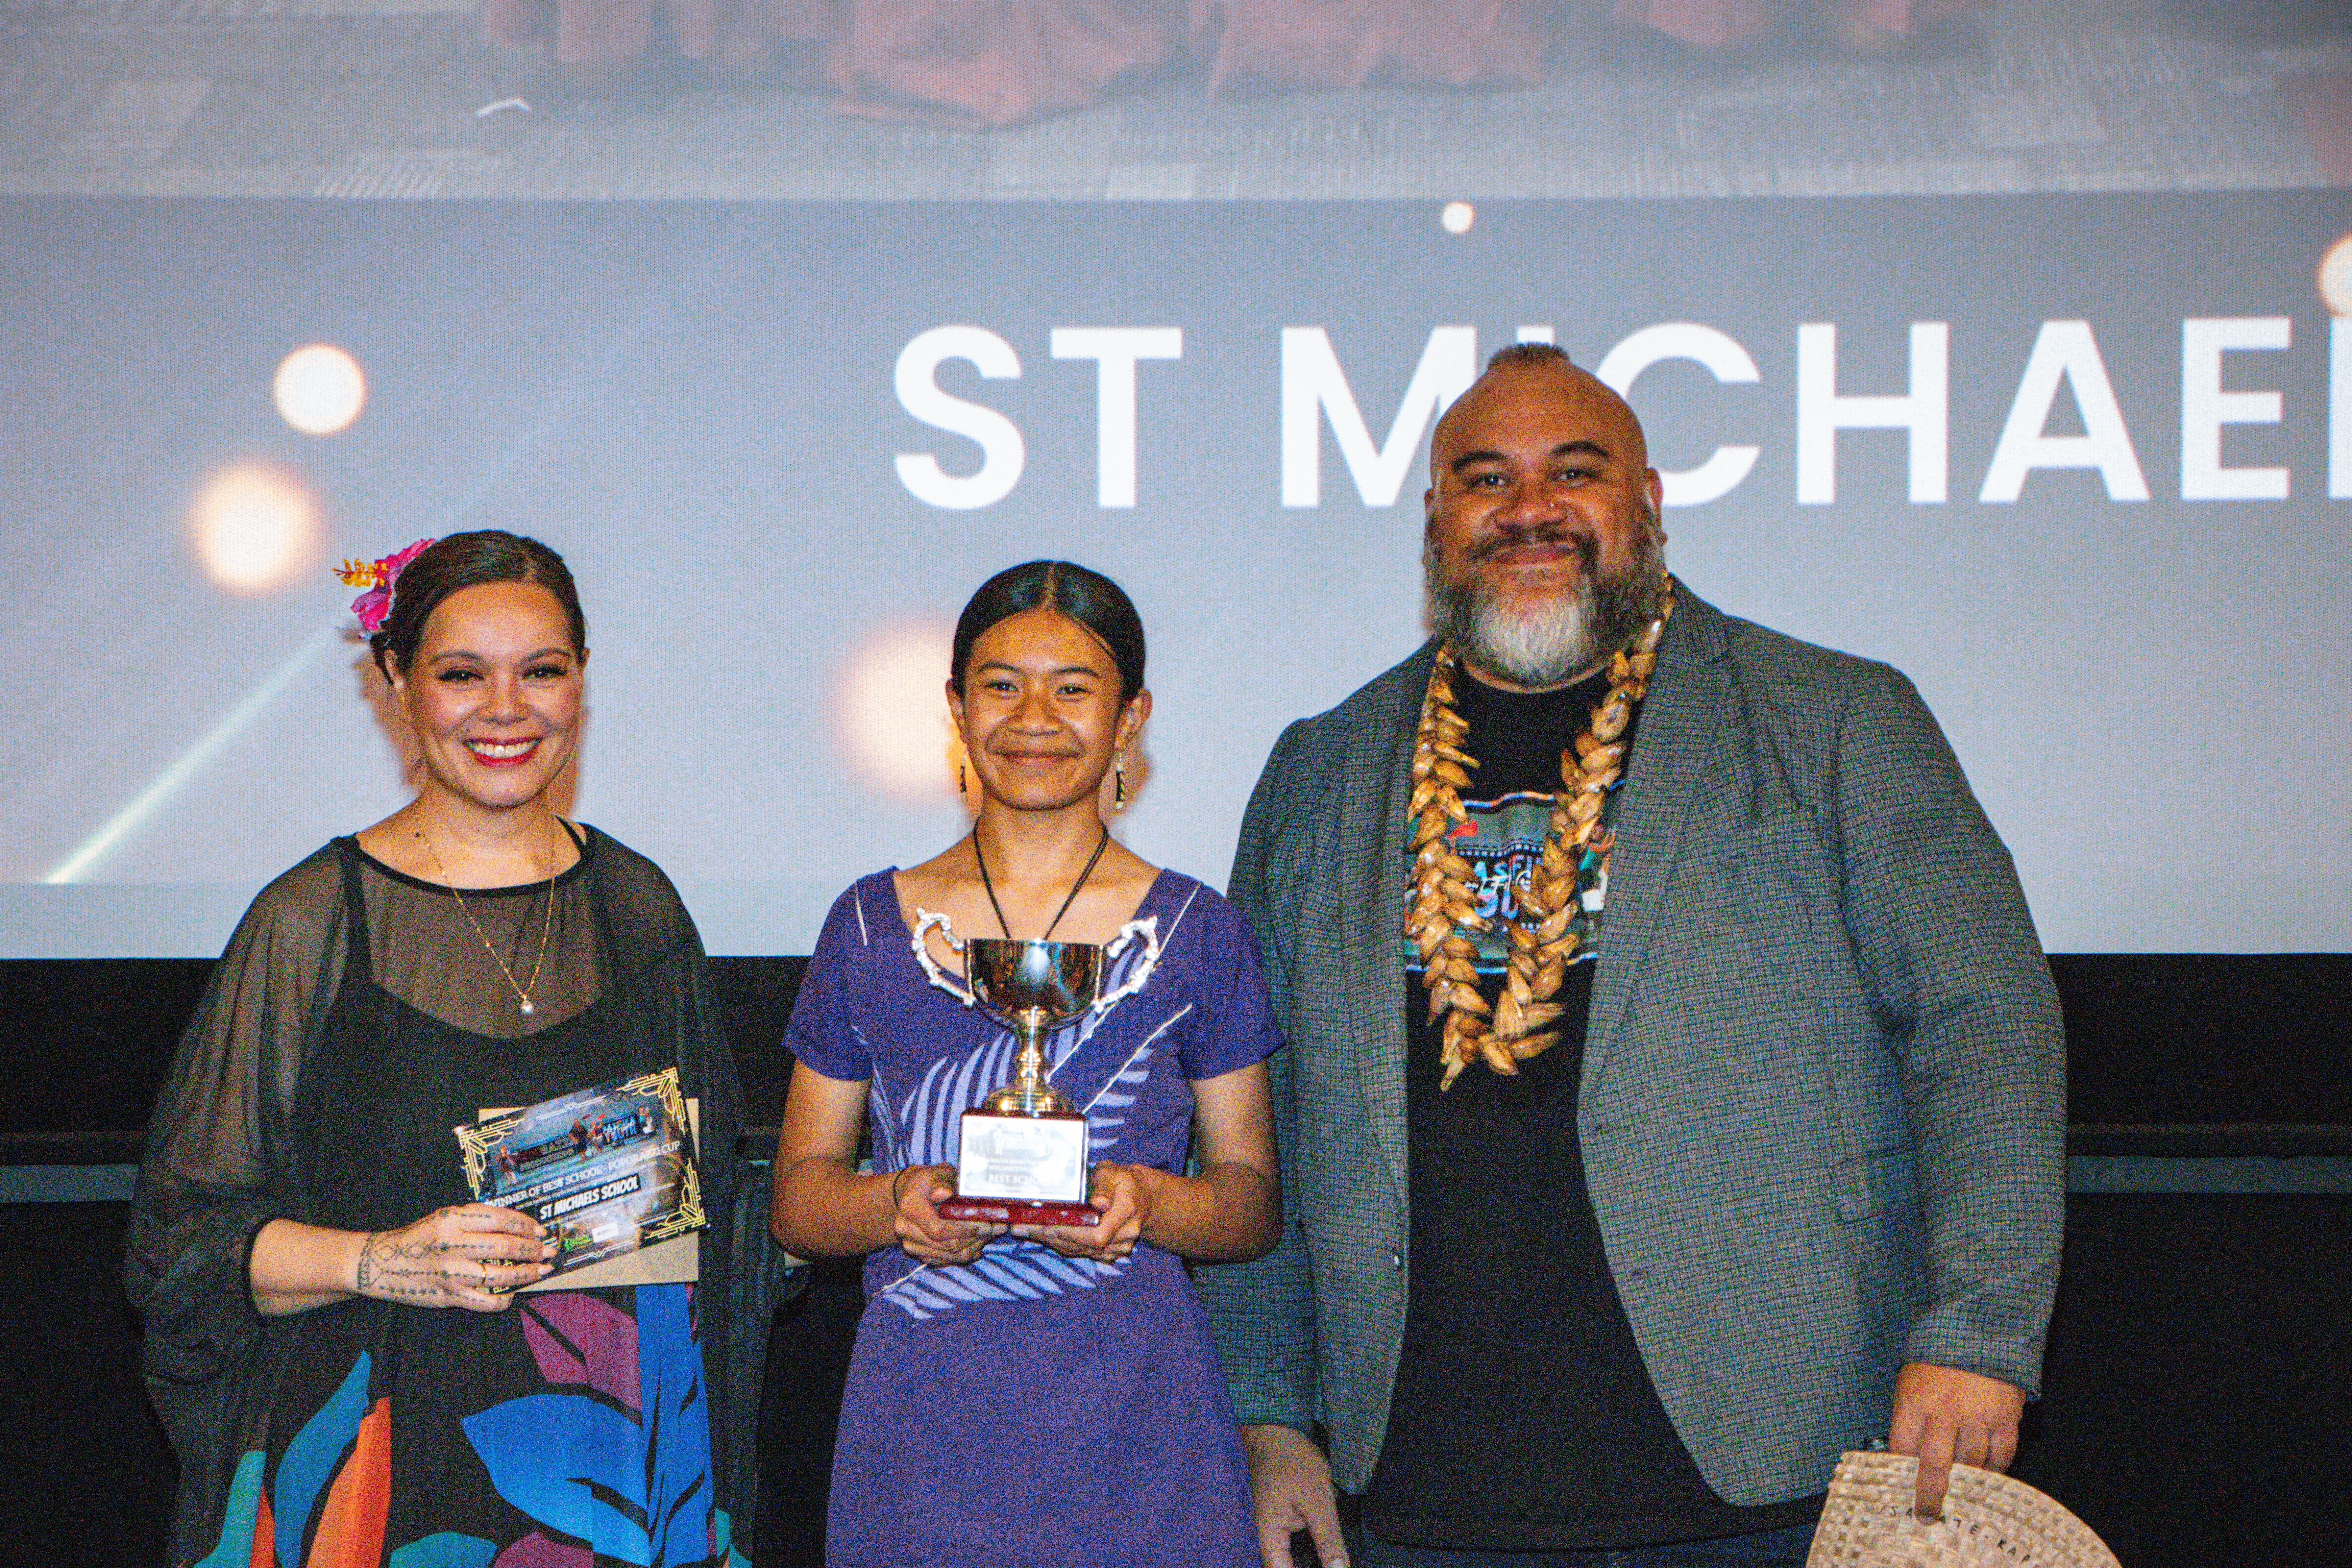 People's Choice awarded to Ivon Murdoch from St Michael's School Taita for her film - The Next Generation. Photo/Supplied